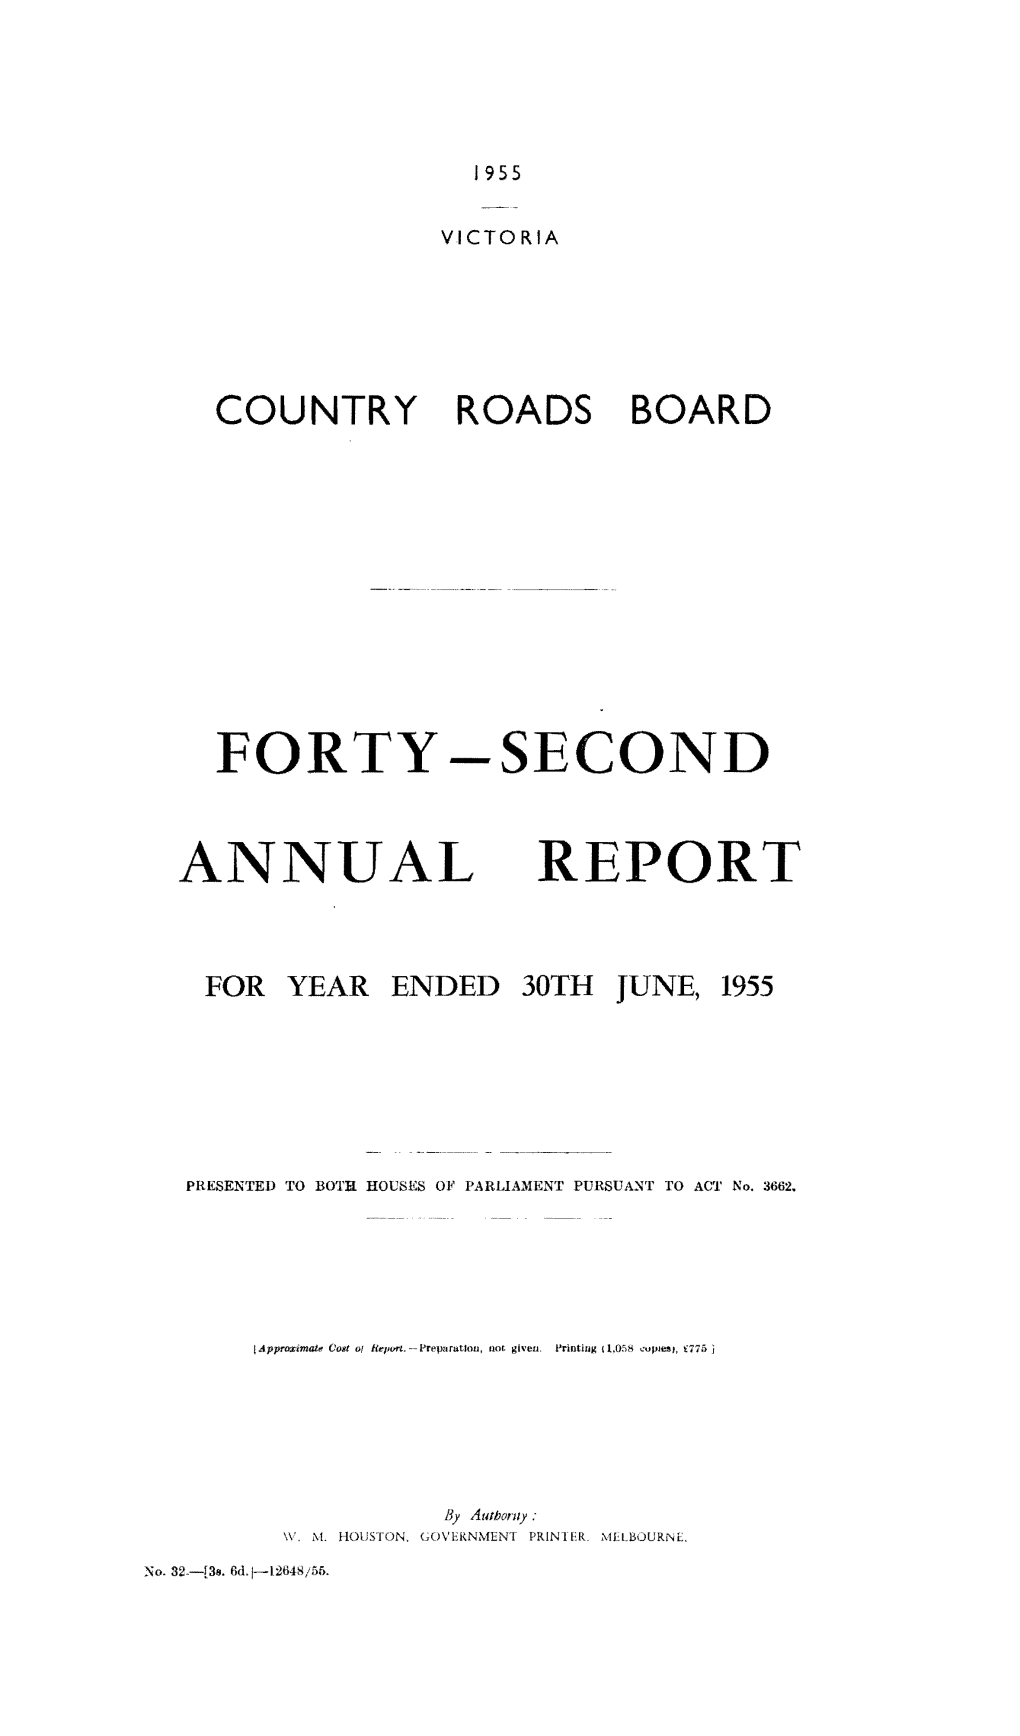 Forty -Second Annual Report